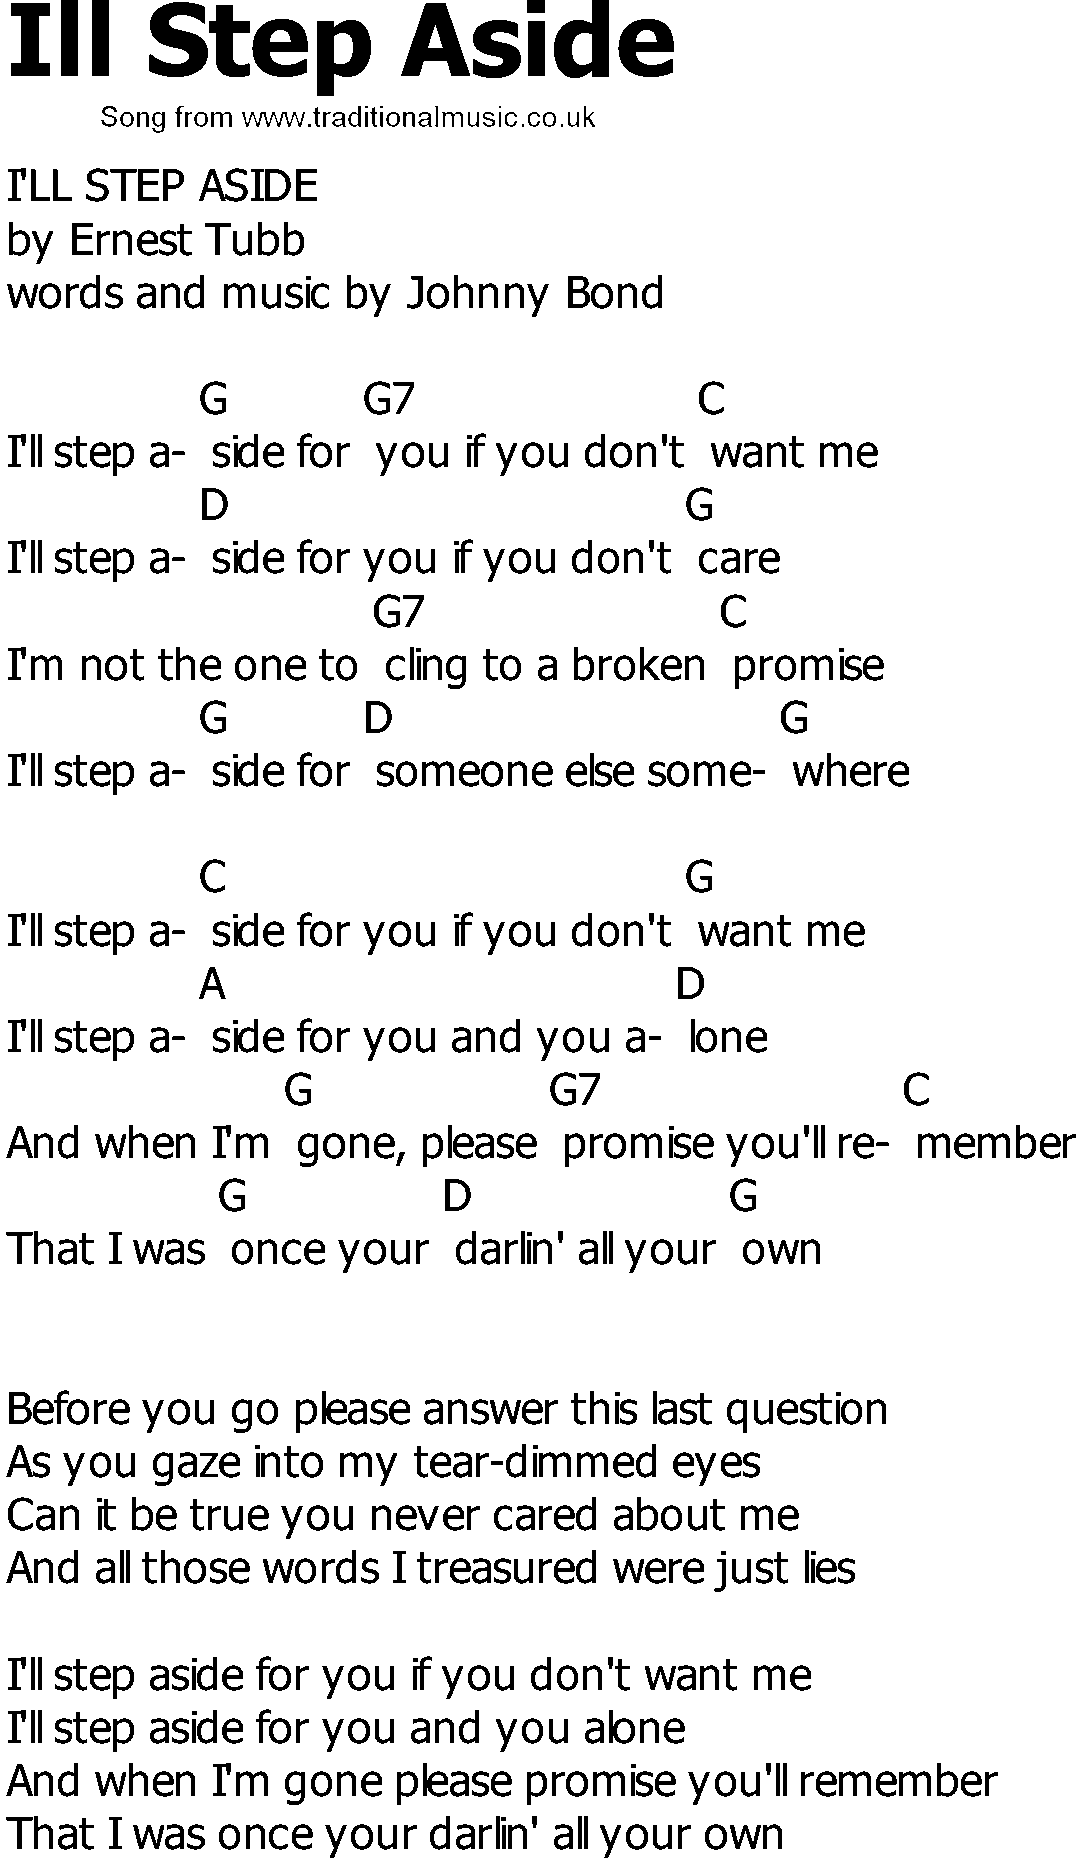 Old Country song lyrics with chords - Ill Step Aside